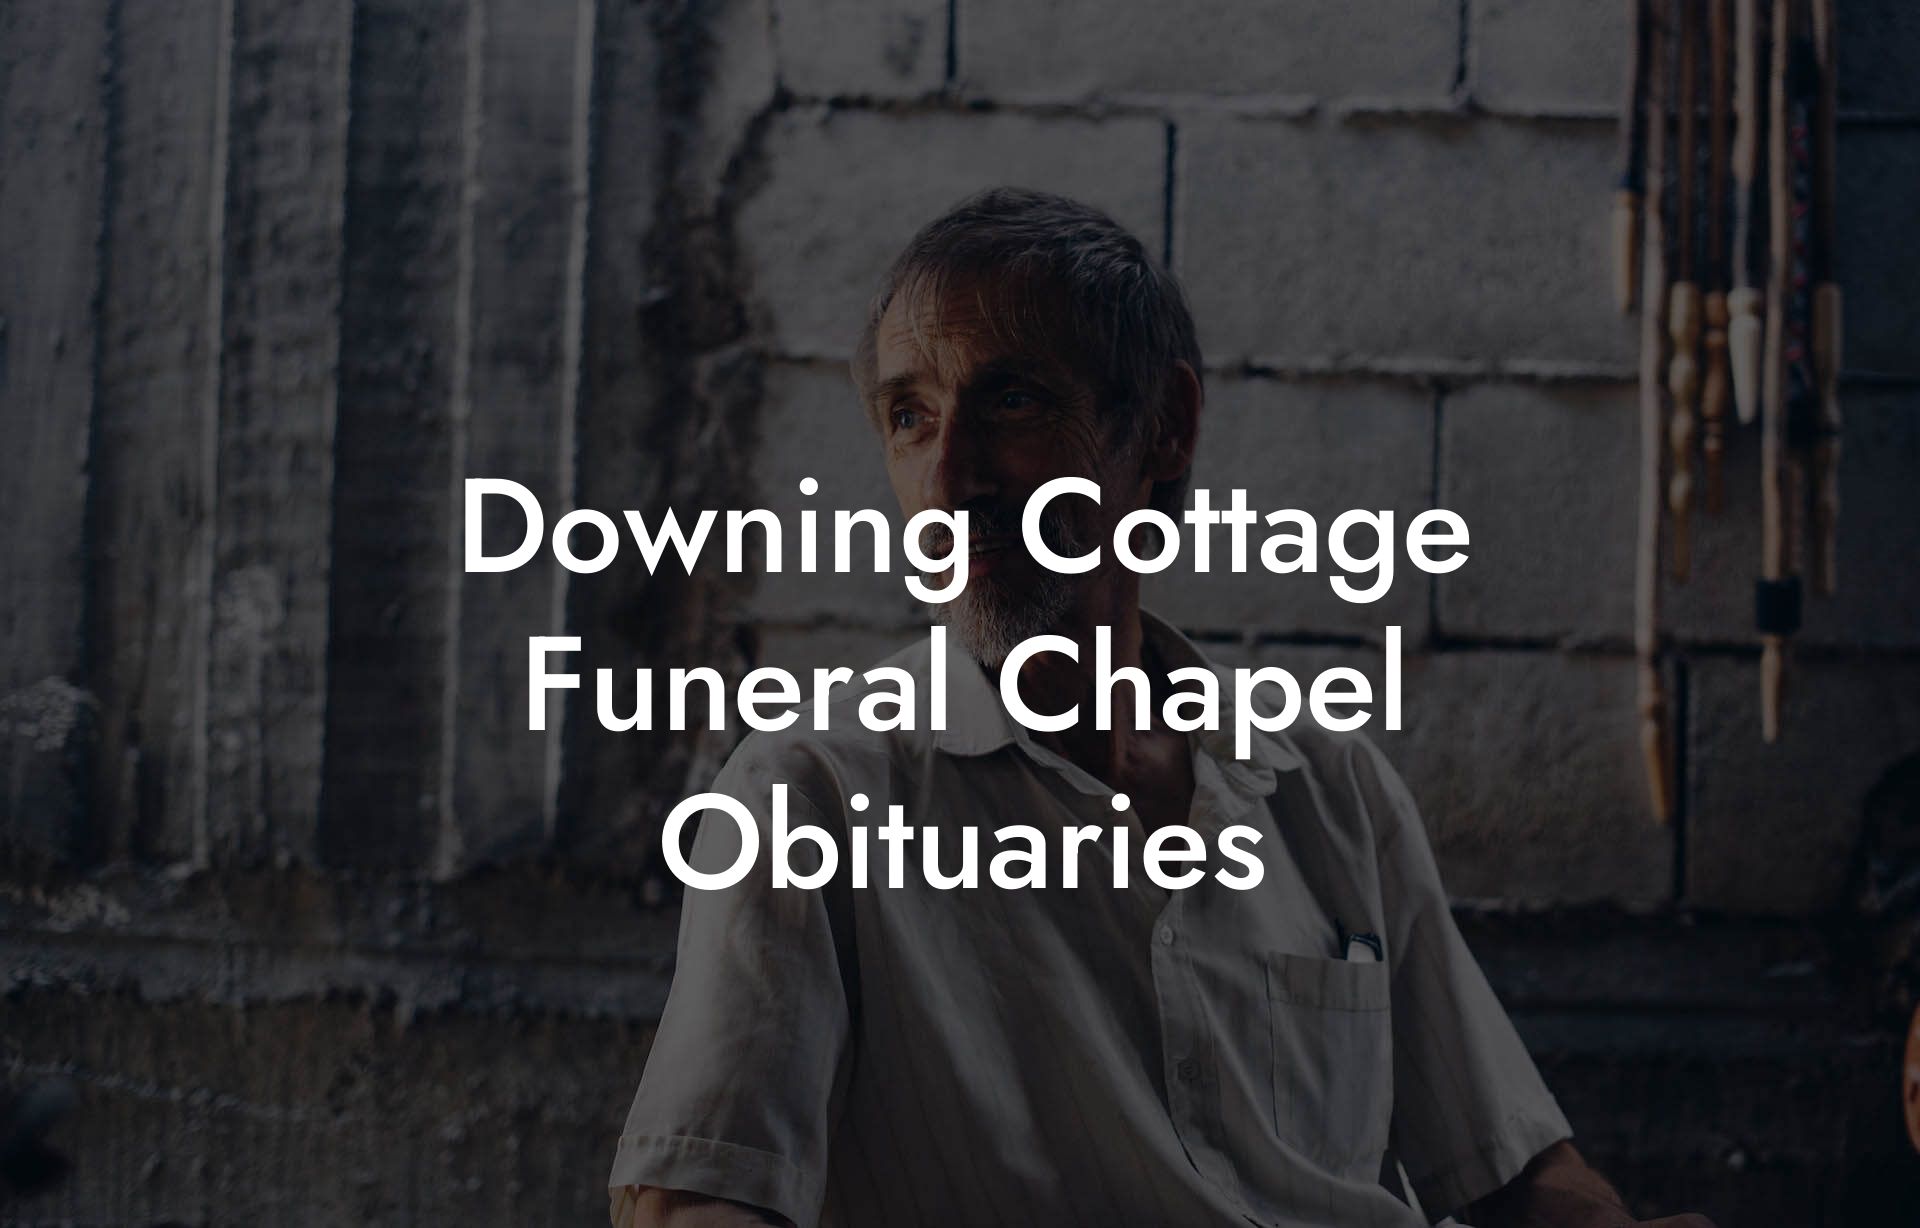 Downing Cottage Funeral Chapel Obituaries